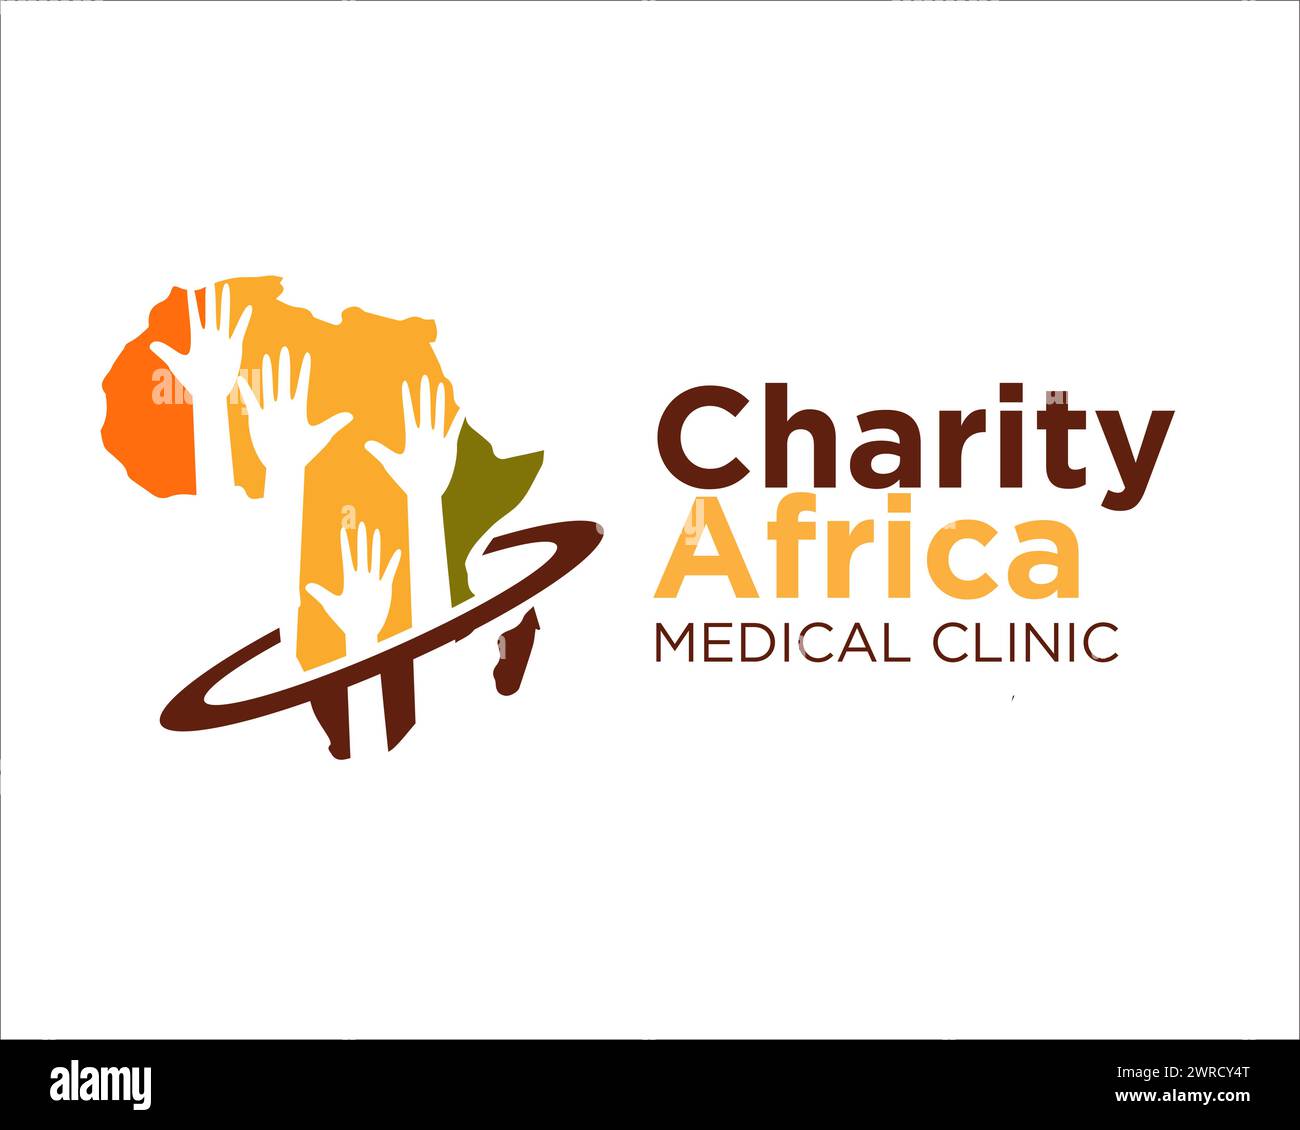 charity africa logo designs with hand figure Stock Vector